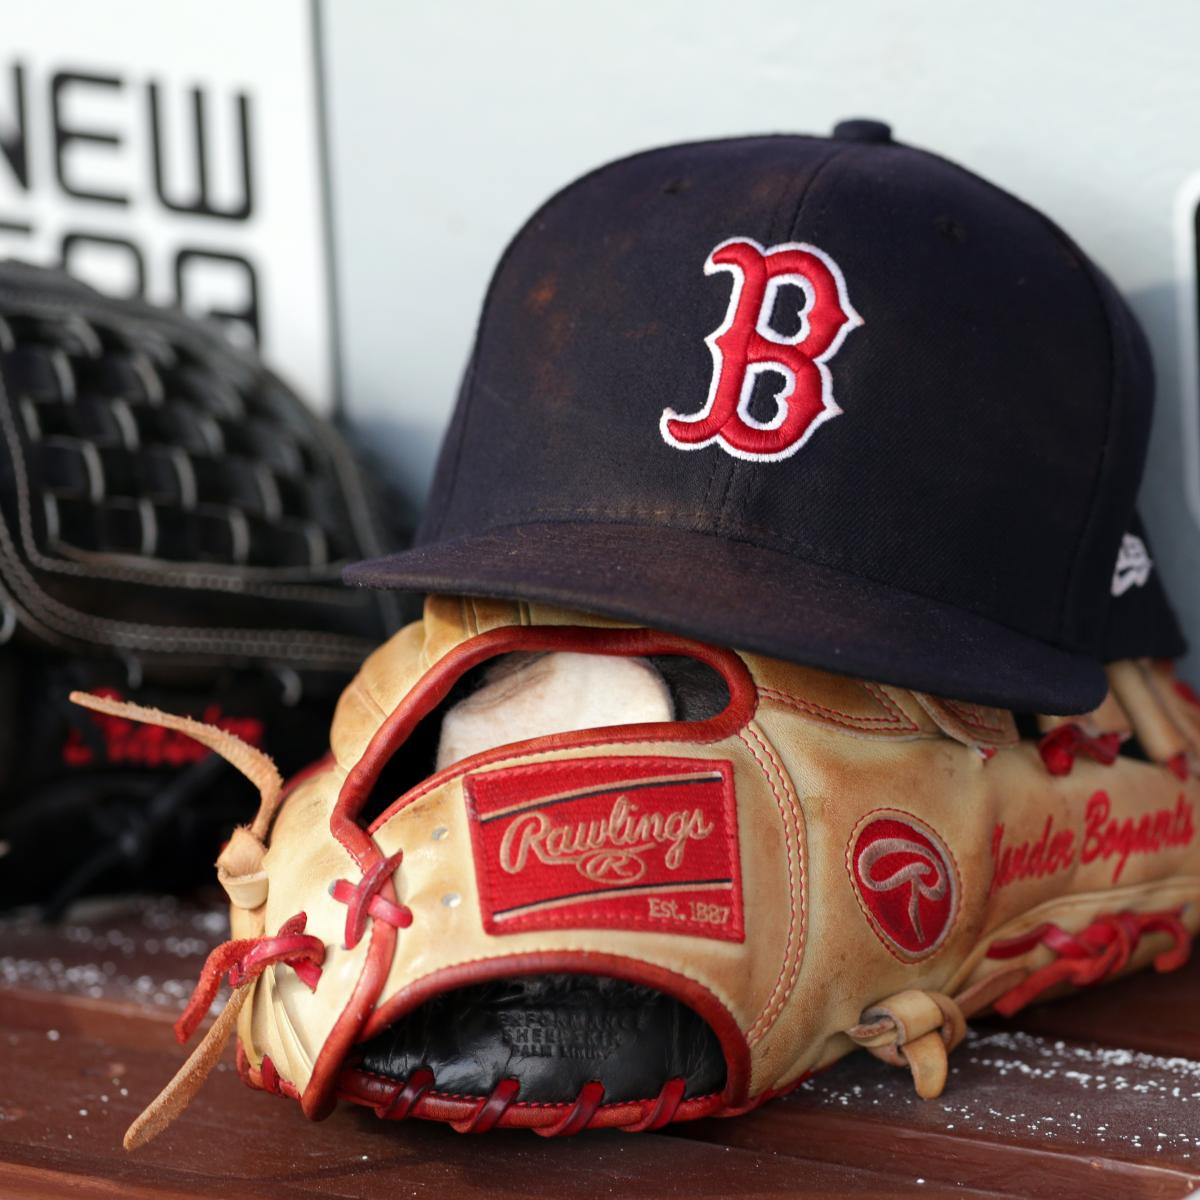 Report: Red Sox May Wait for MLB Investigation Results Before Hiring ...